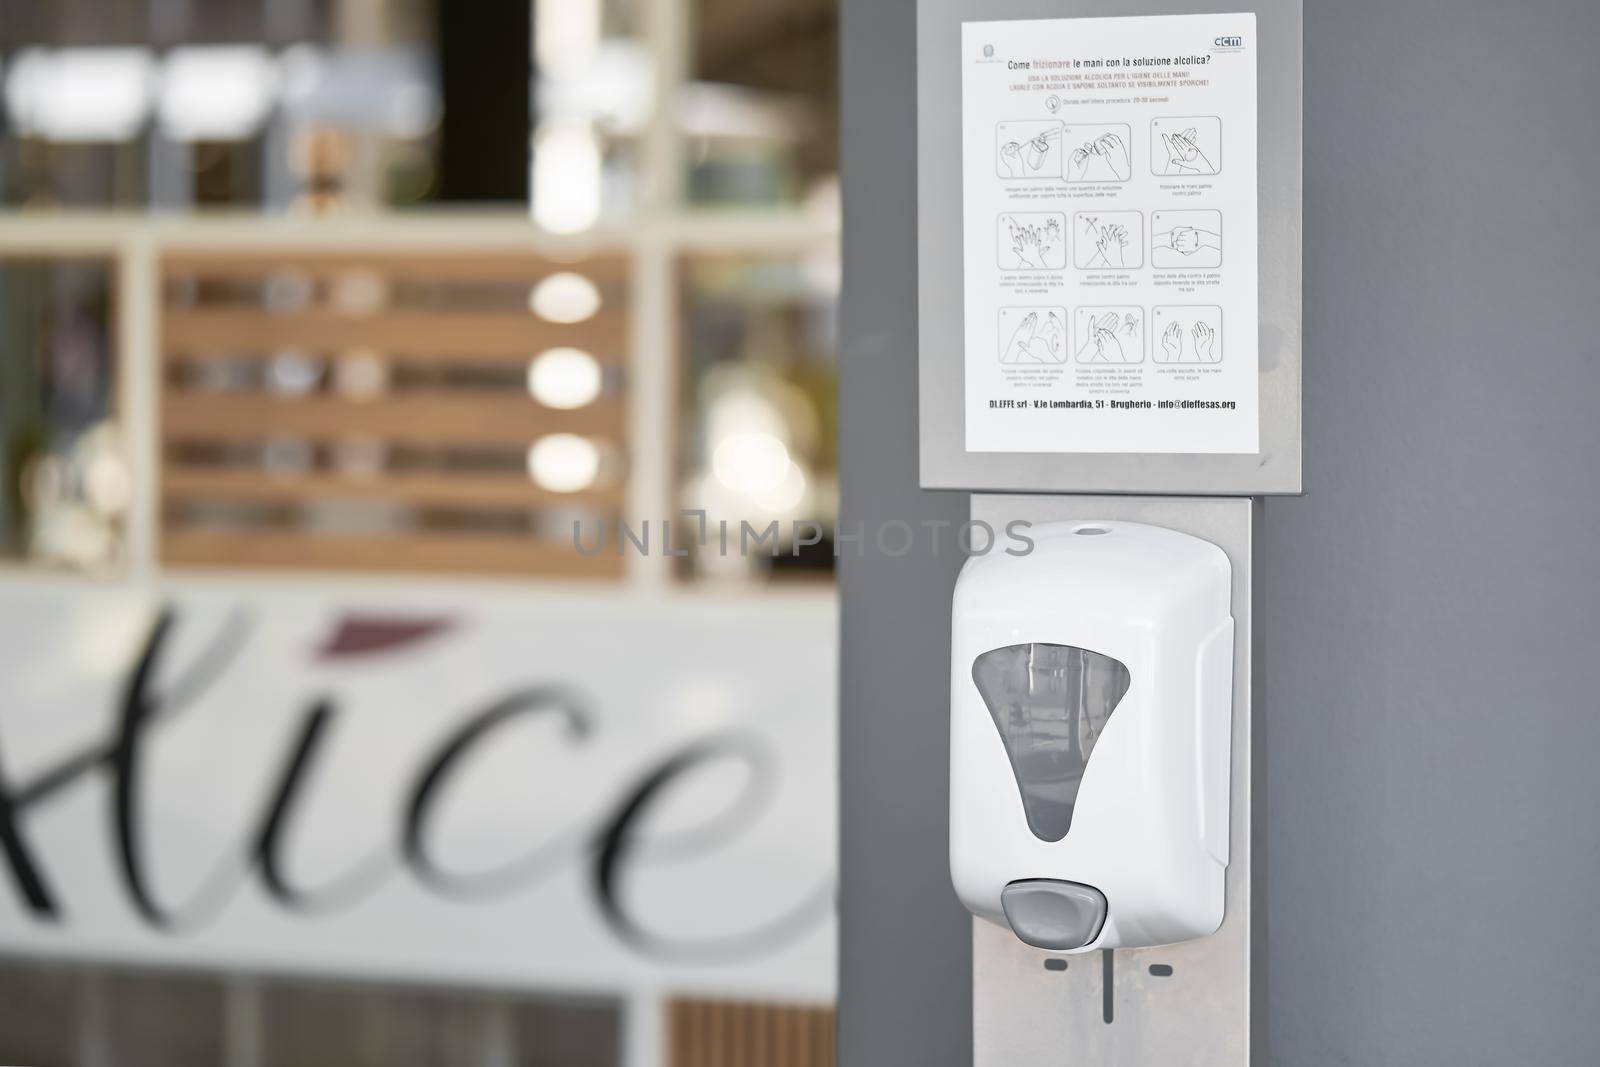 Hand sanitizer machine in public place near the wall at the entrance to shopping center. Automatic dispenser with alcohol gel sanitizer by photolime